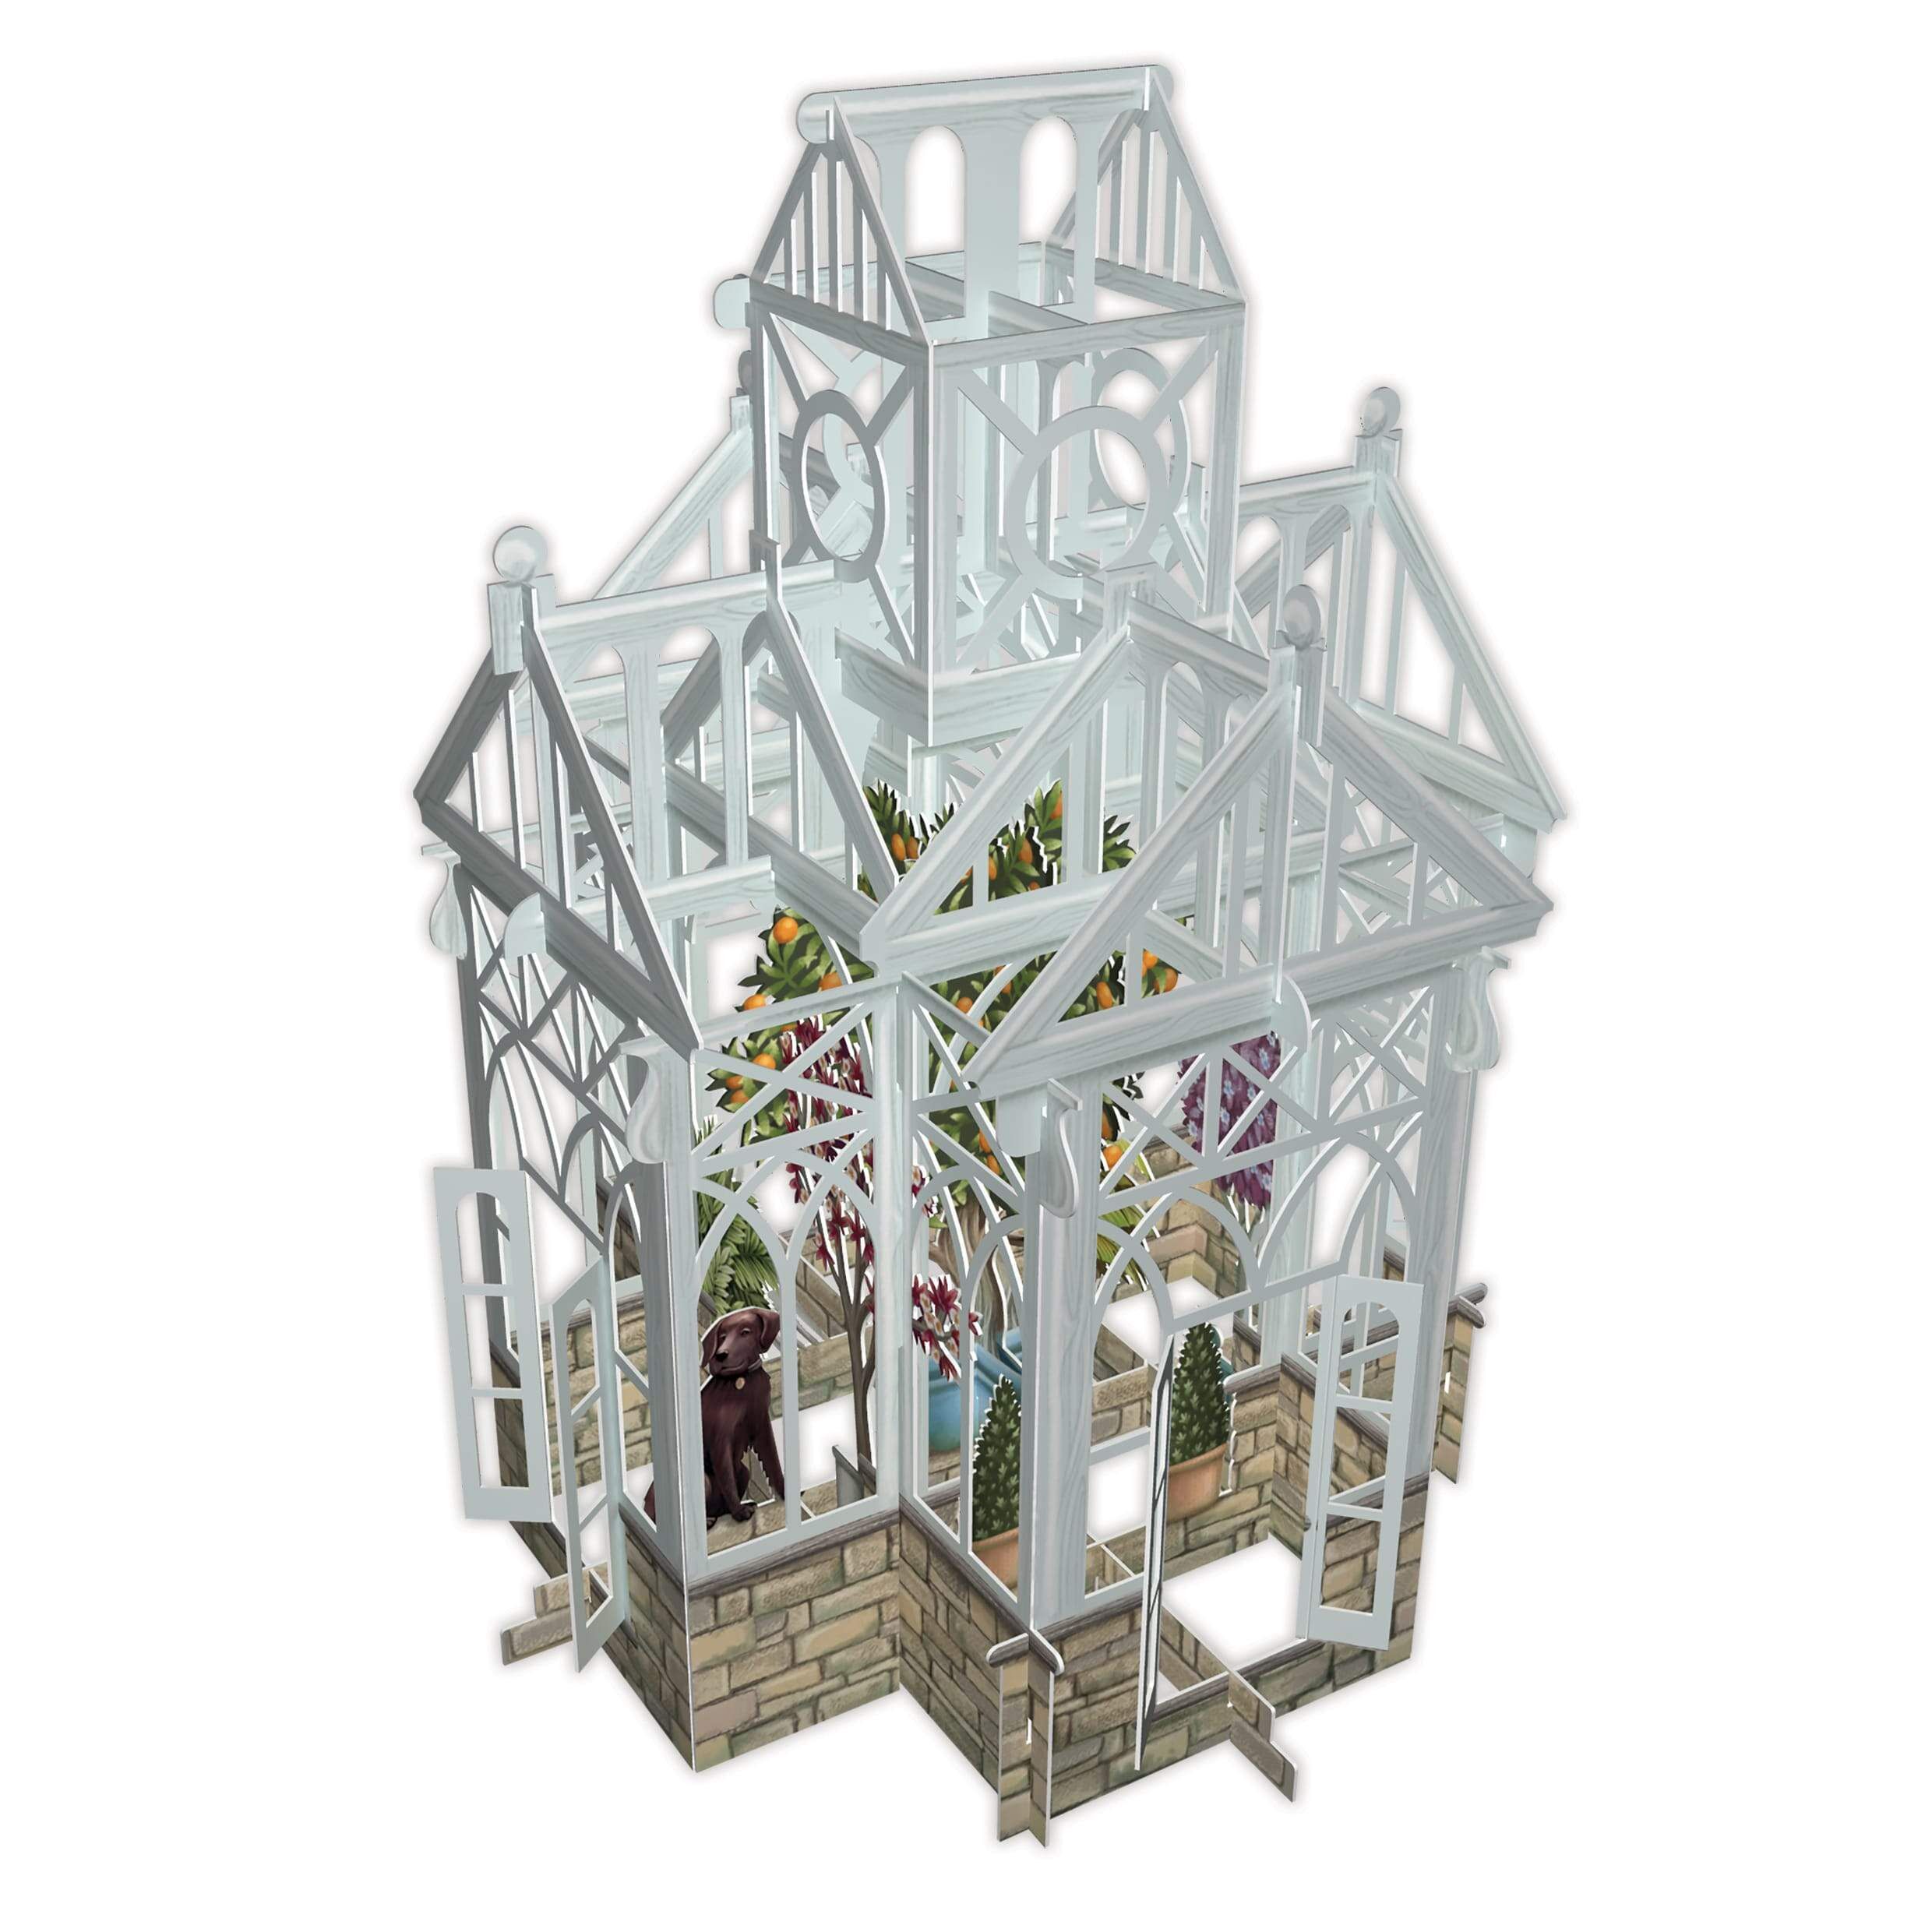 Card (3D Pop up): The Glasshouse